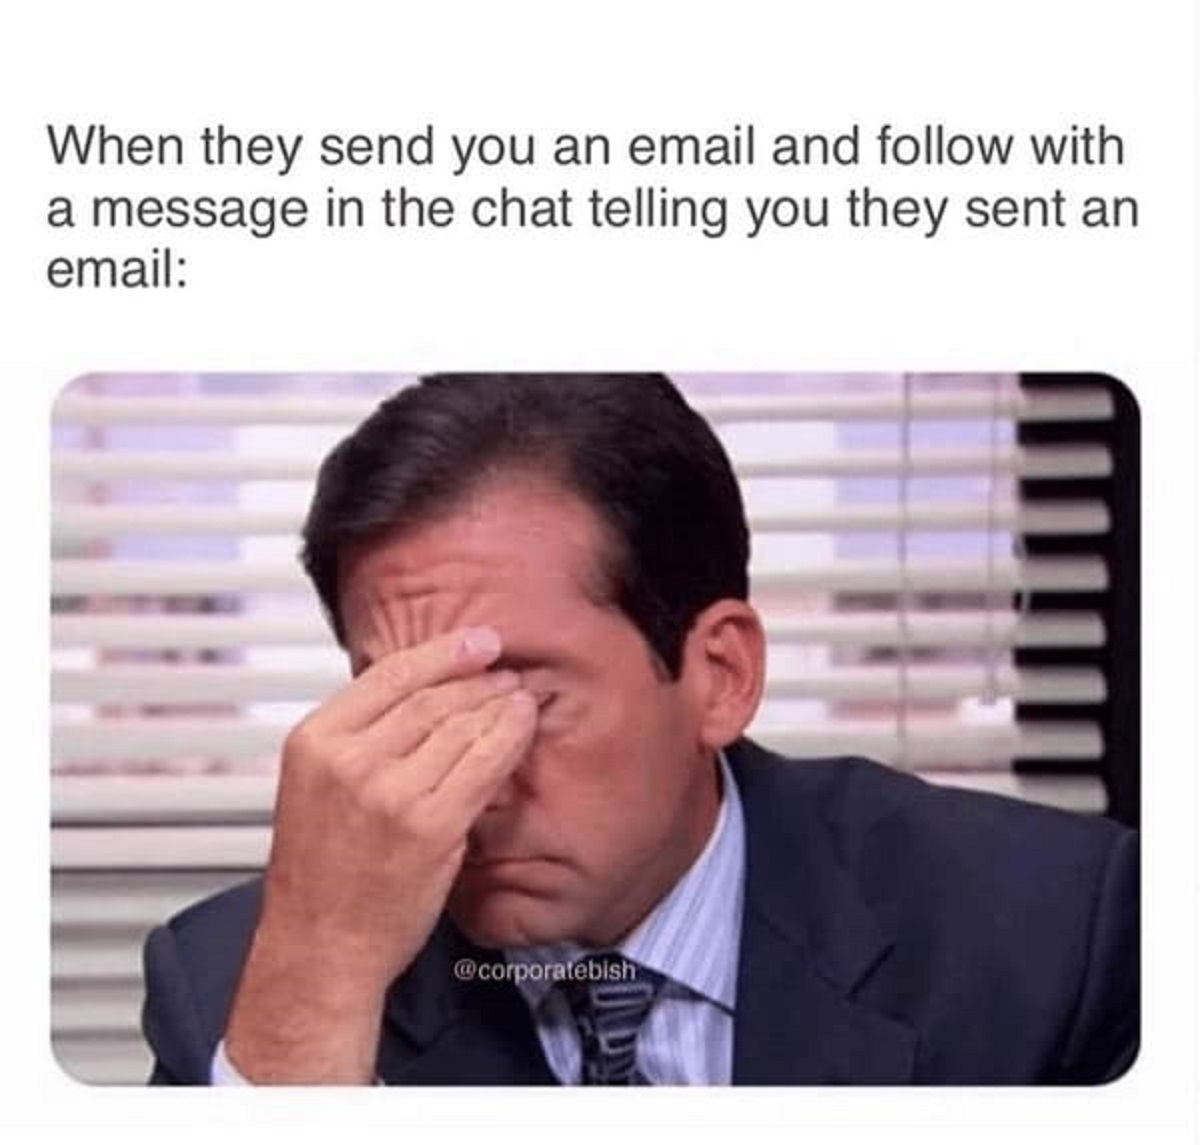 photo caption - When they send you an email and with a message in the chat telling you they sent an email